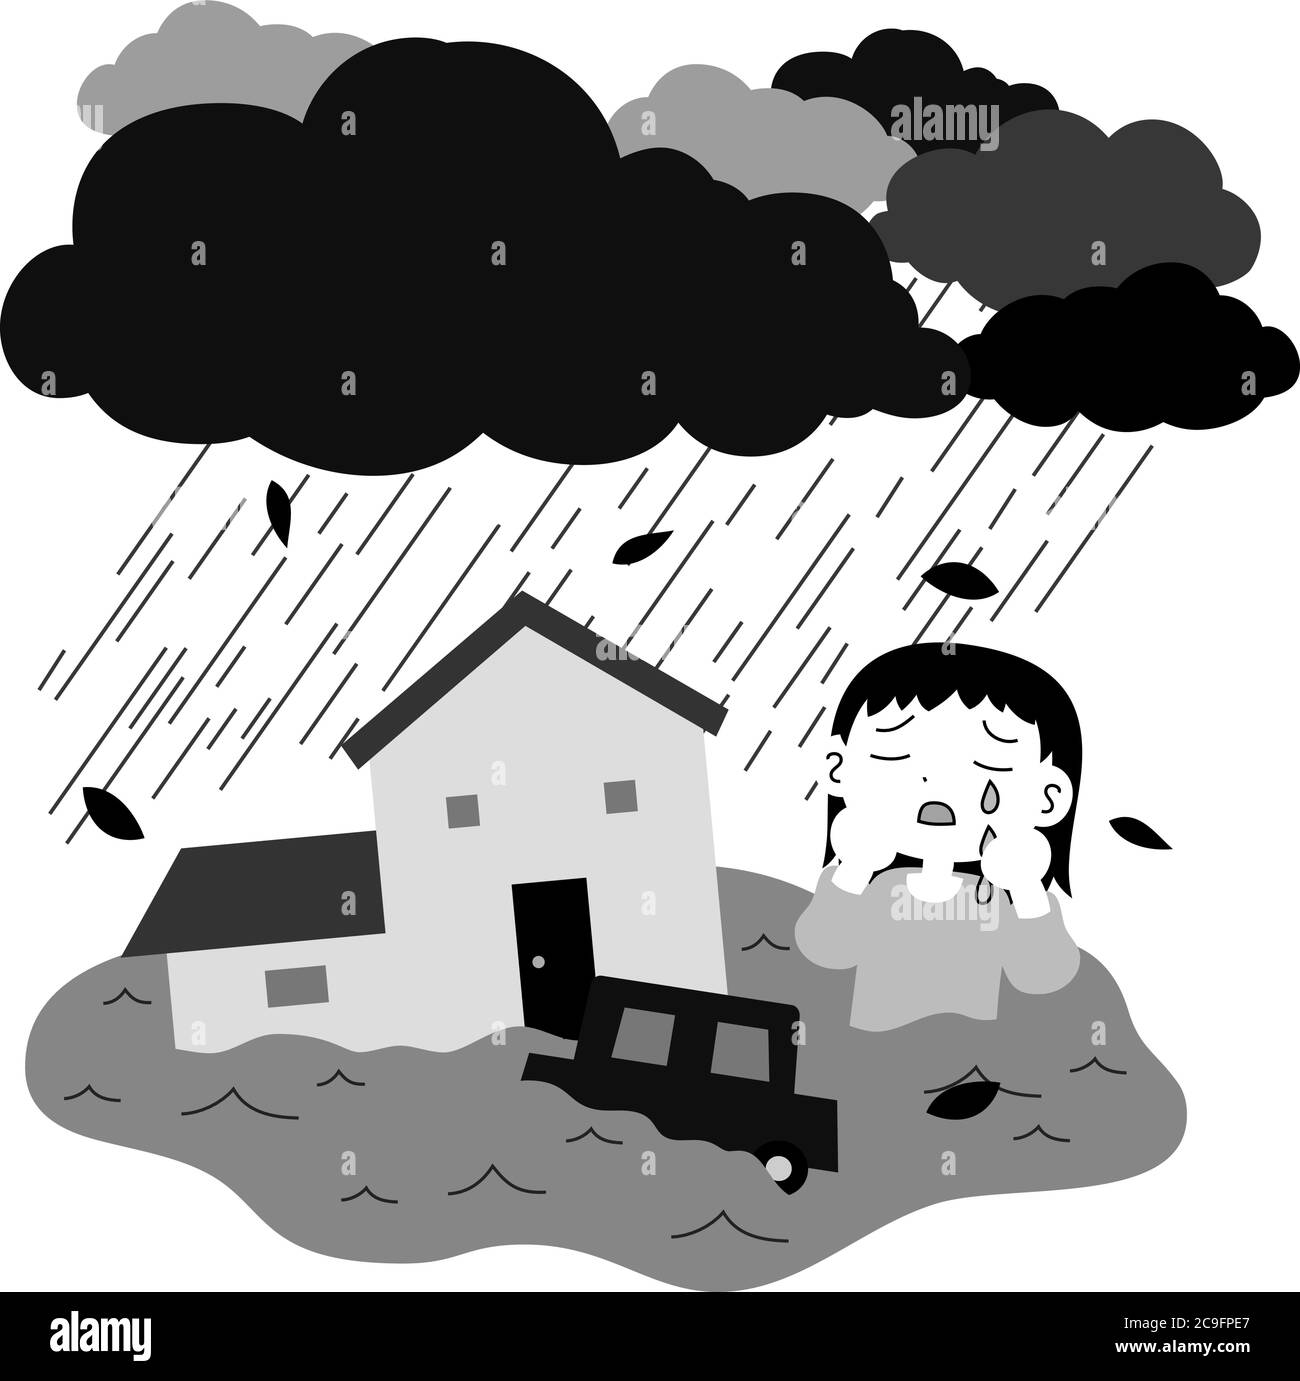 This is a illustration of Town affected by heavy rain and flood Stock Vector